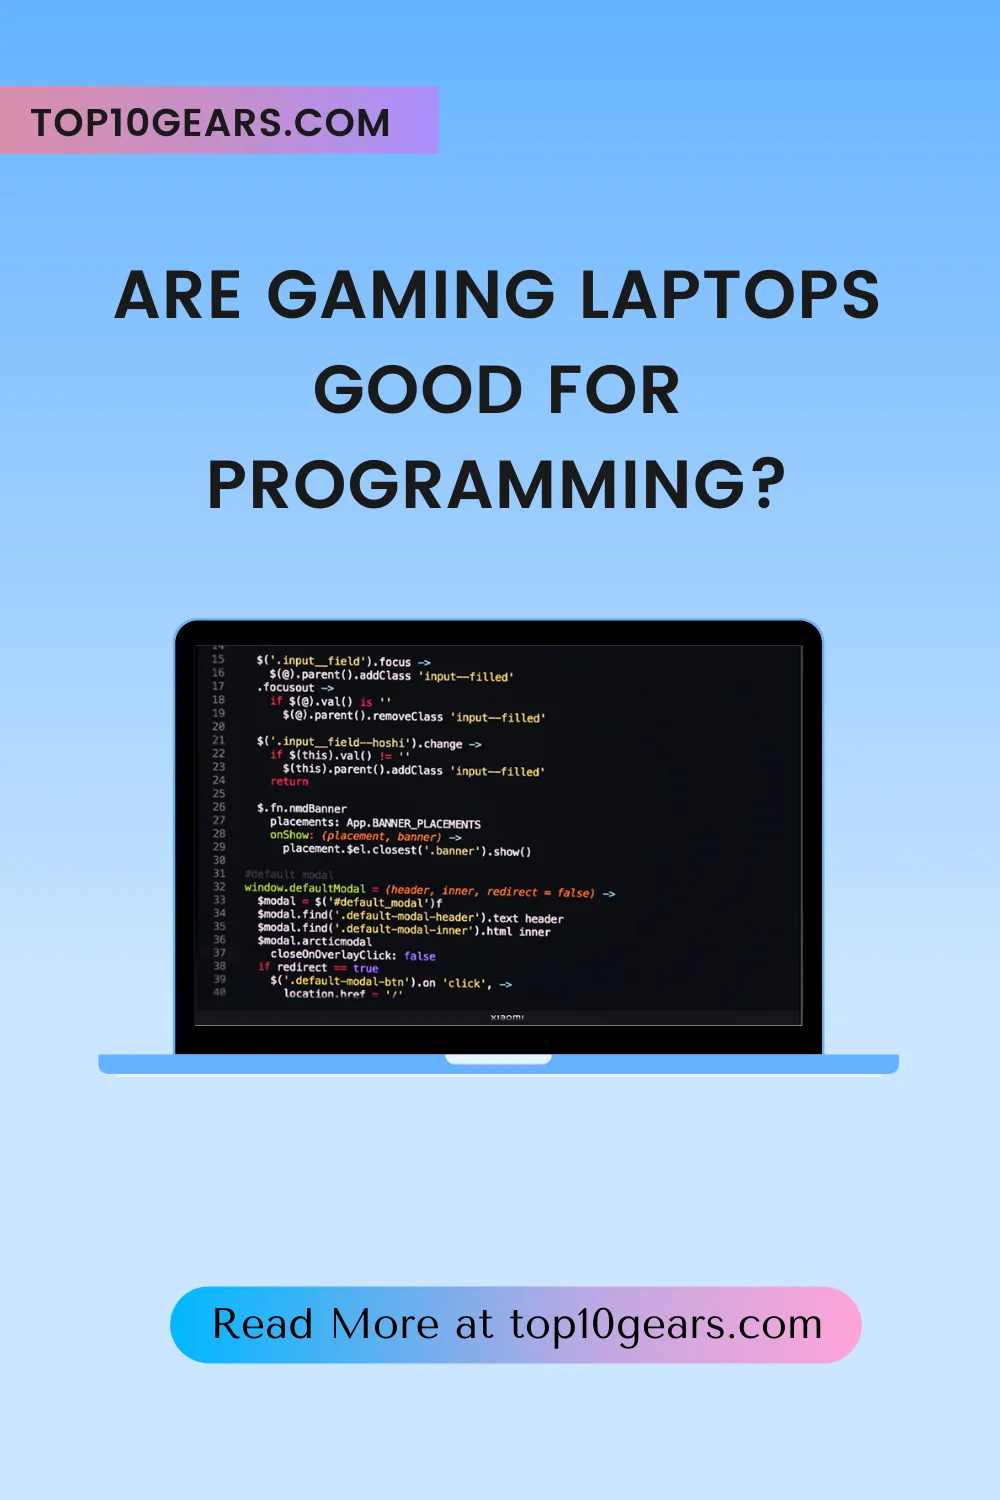 Are Gaming Laptops Good For Programming?